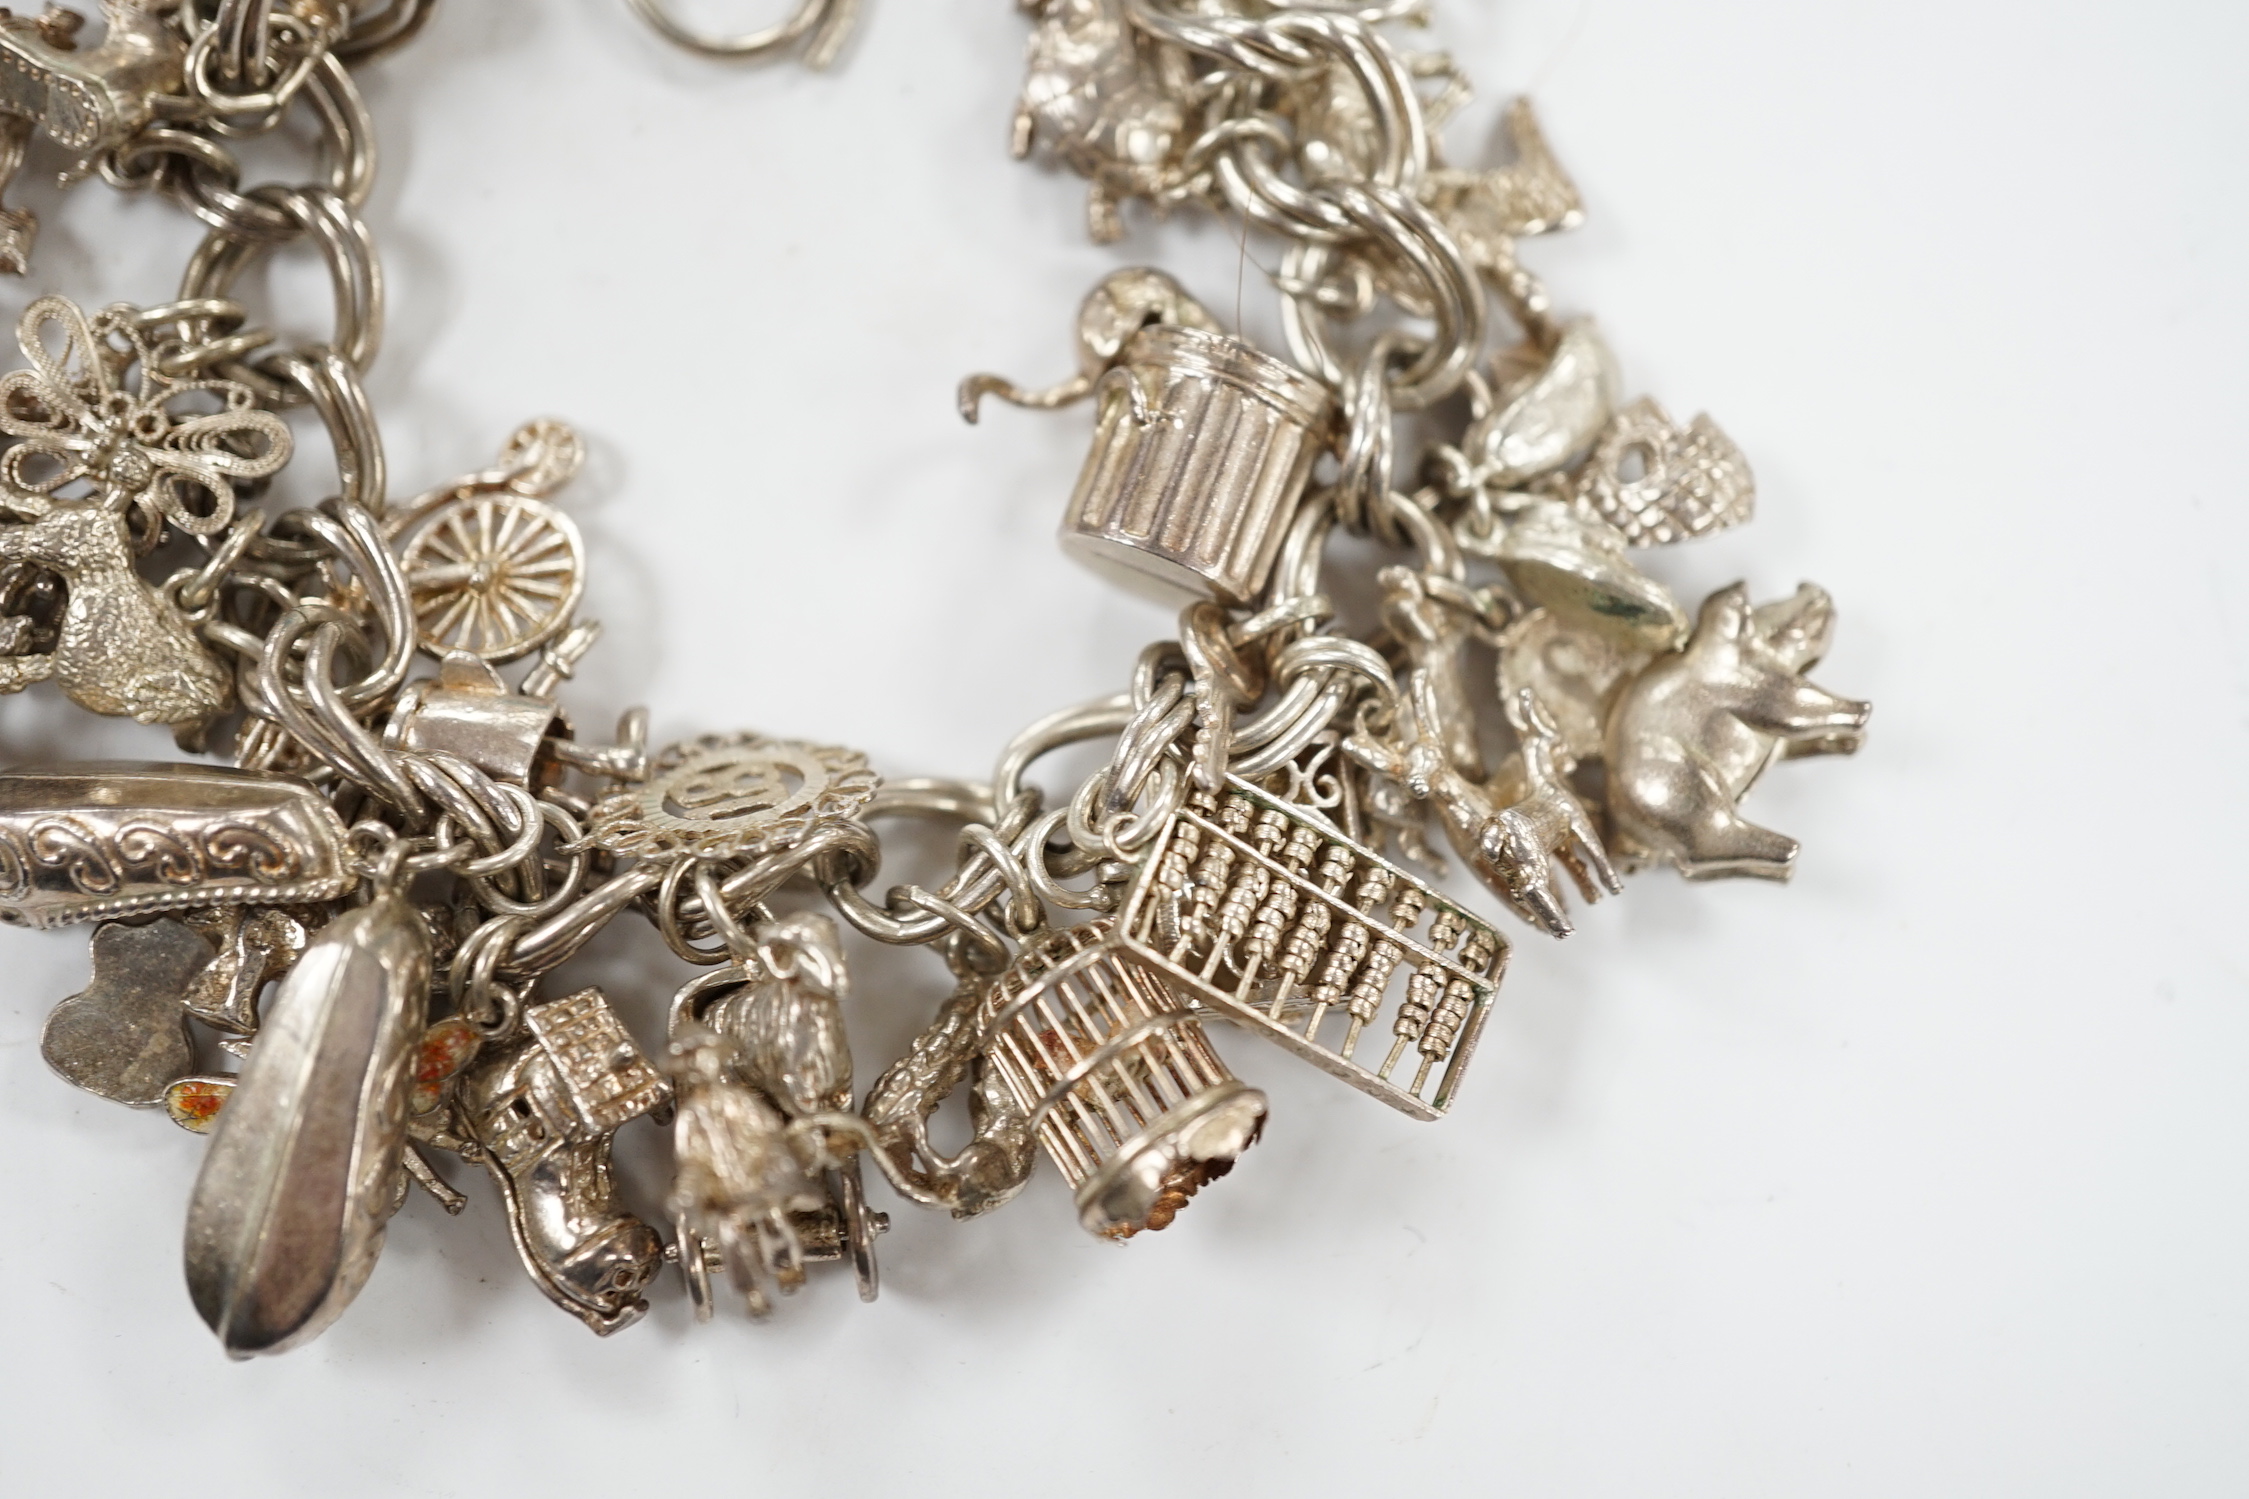 A 1970's silver charm bracelet, hung with assorted charms including birdcage, abacus, piglet, etc. and another silver charm bracelet with loose charms.